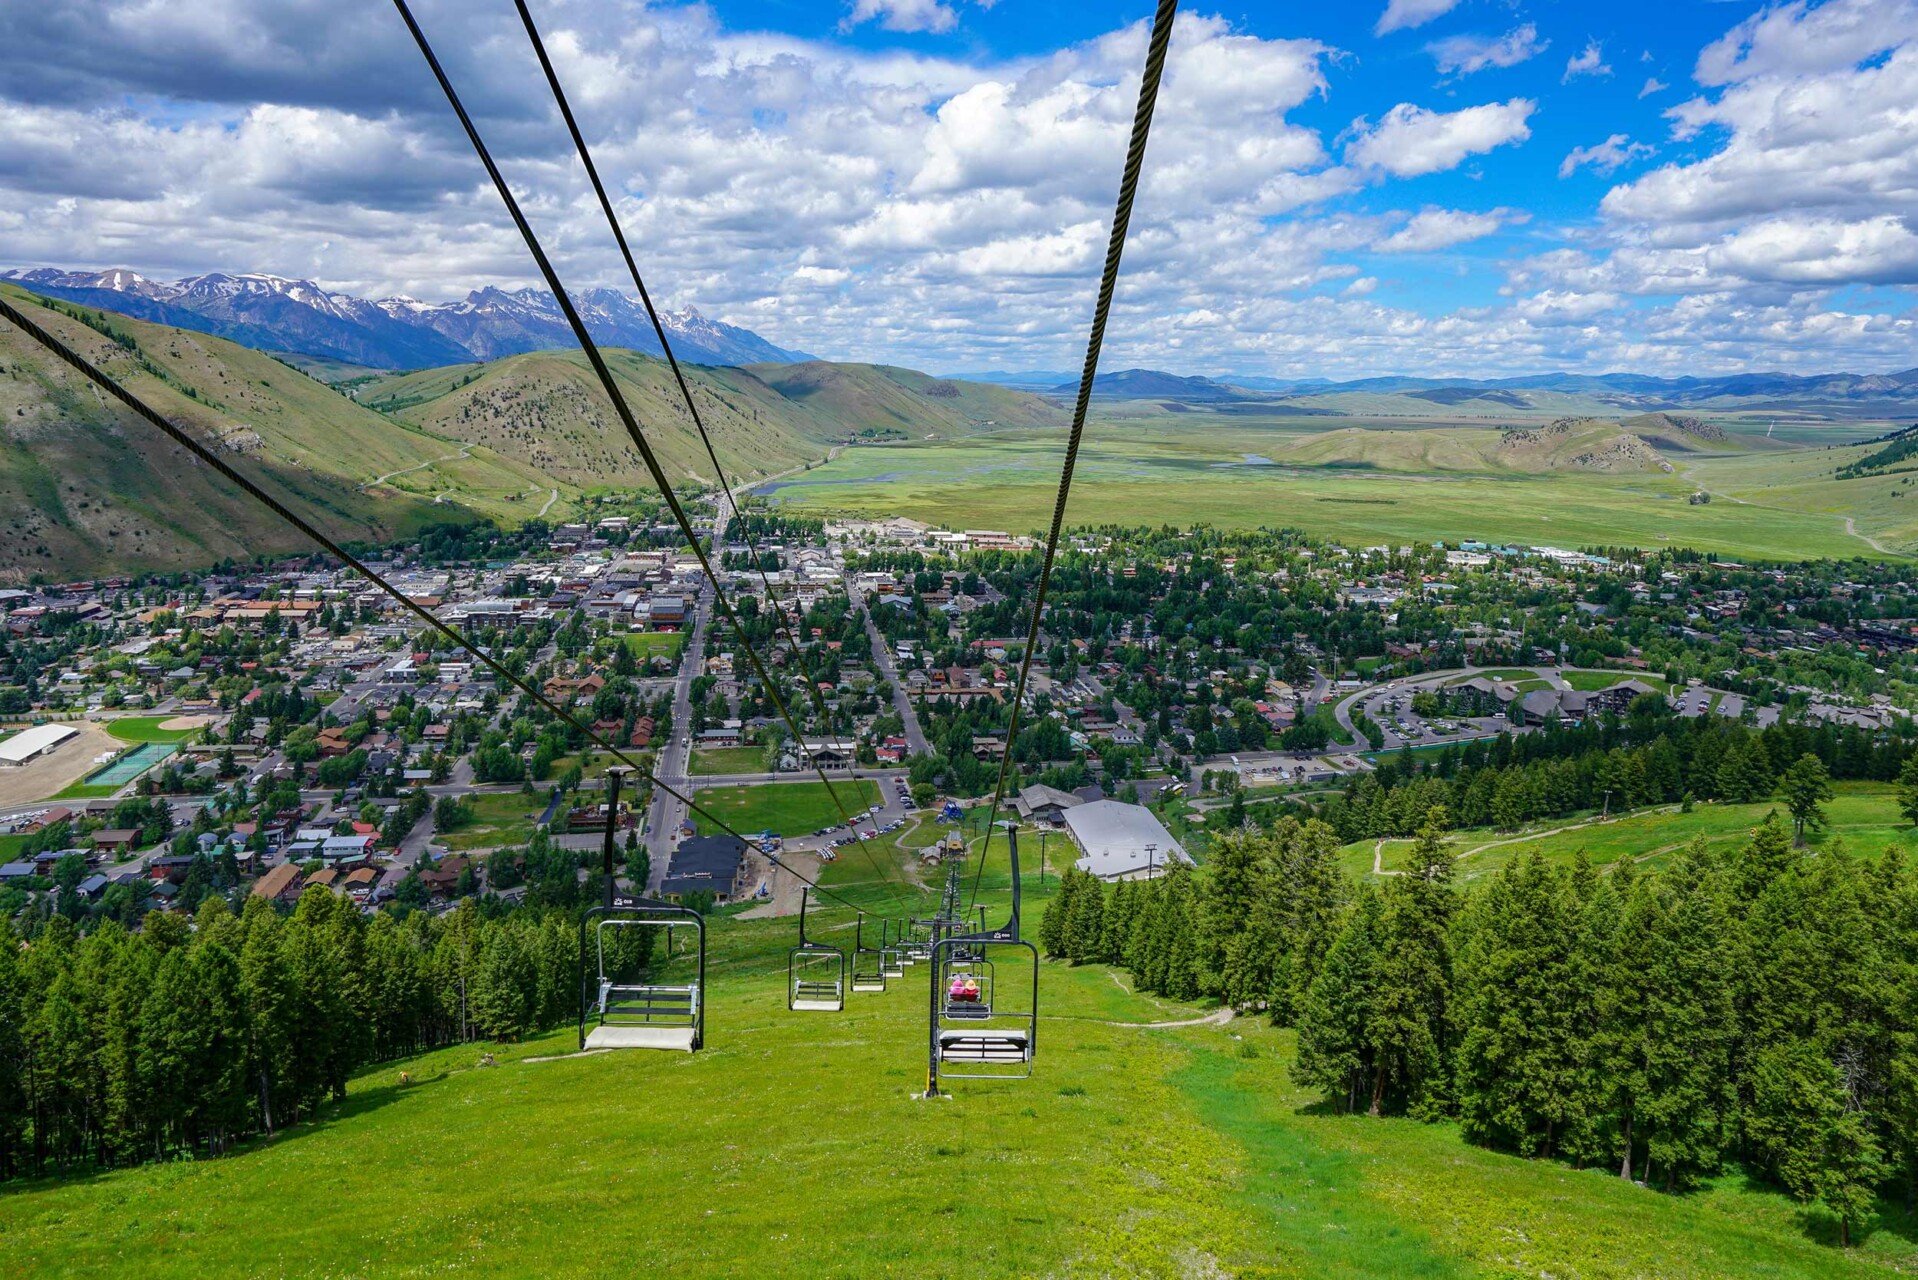 Snow King Scenic Chairlift Summer Jackson Hole